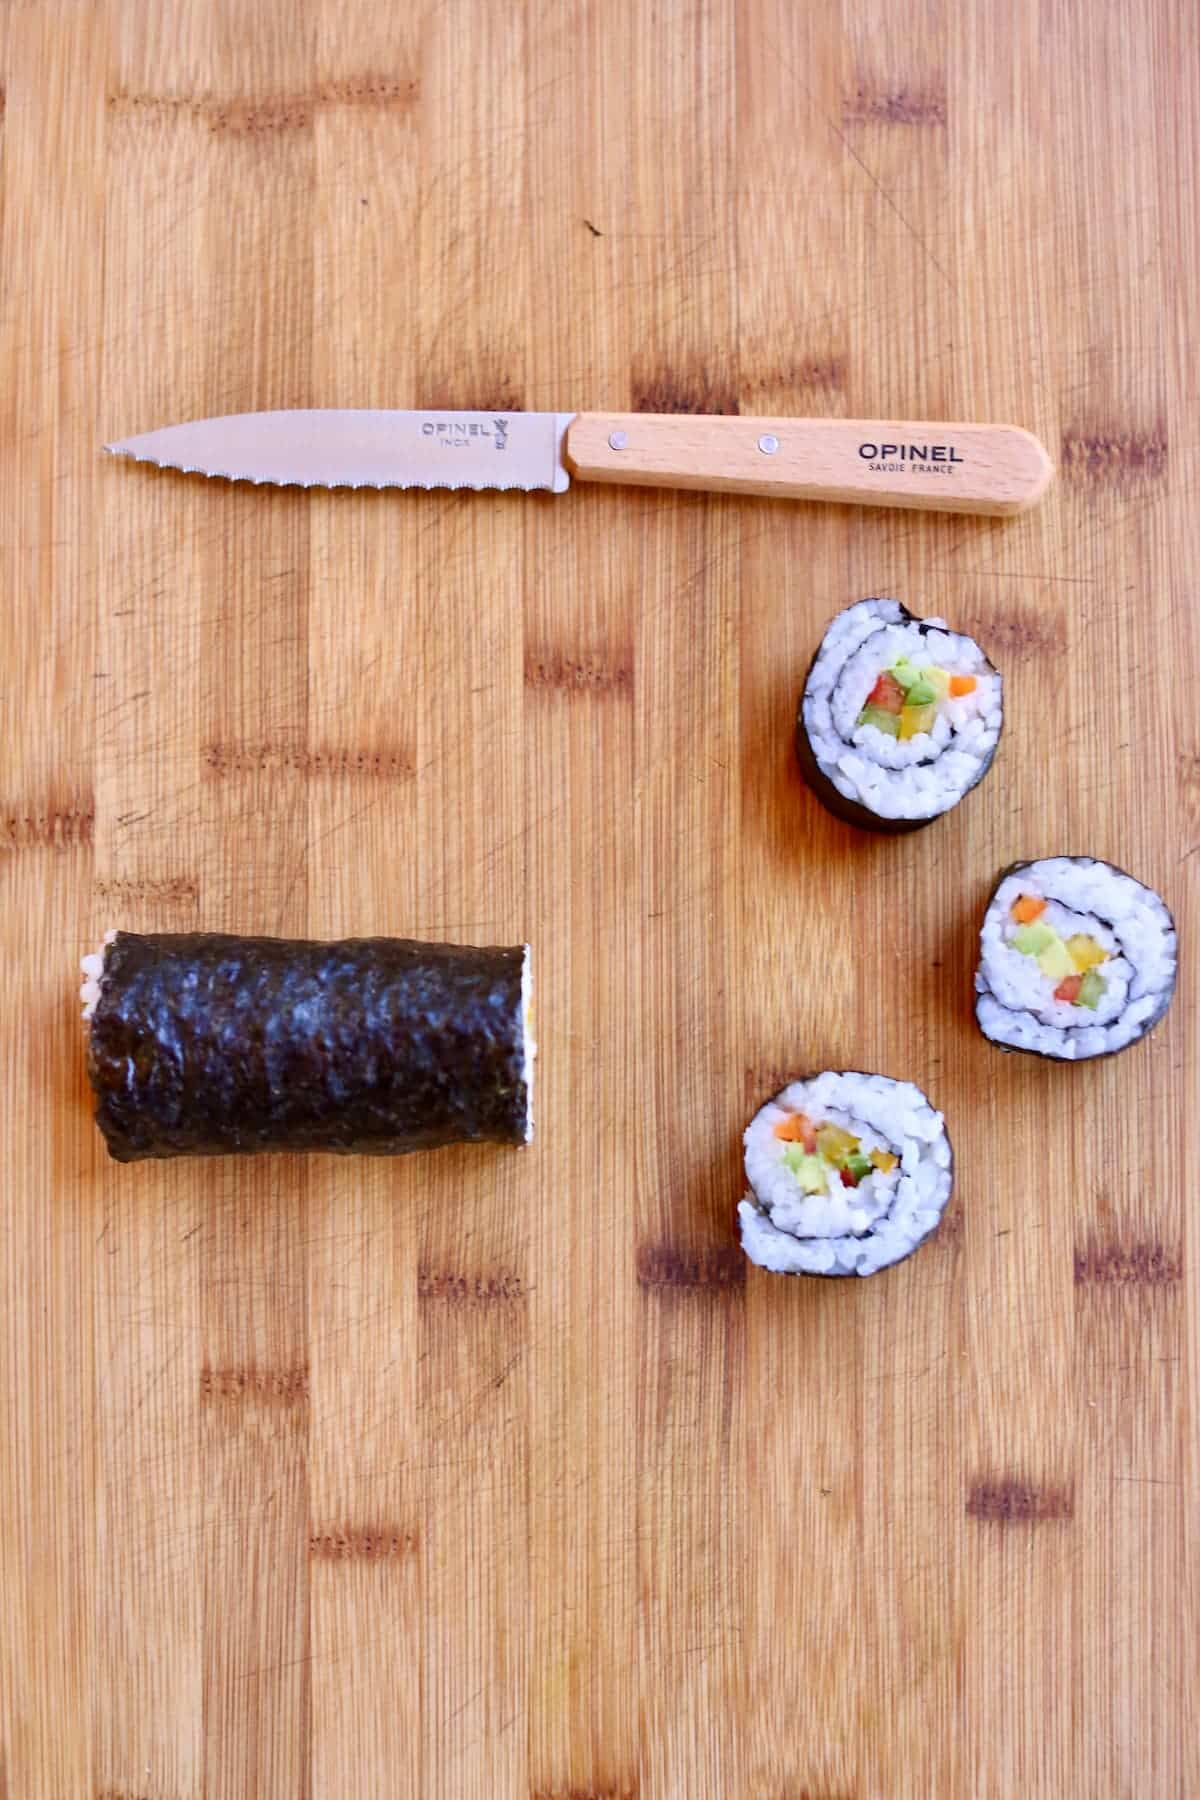 a cutting board with a sushi roll with slices made, and a knife.